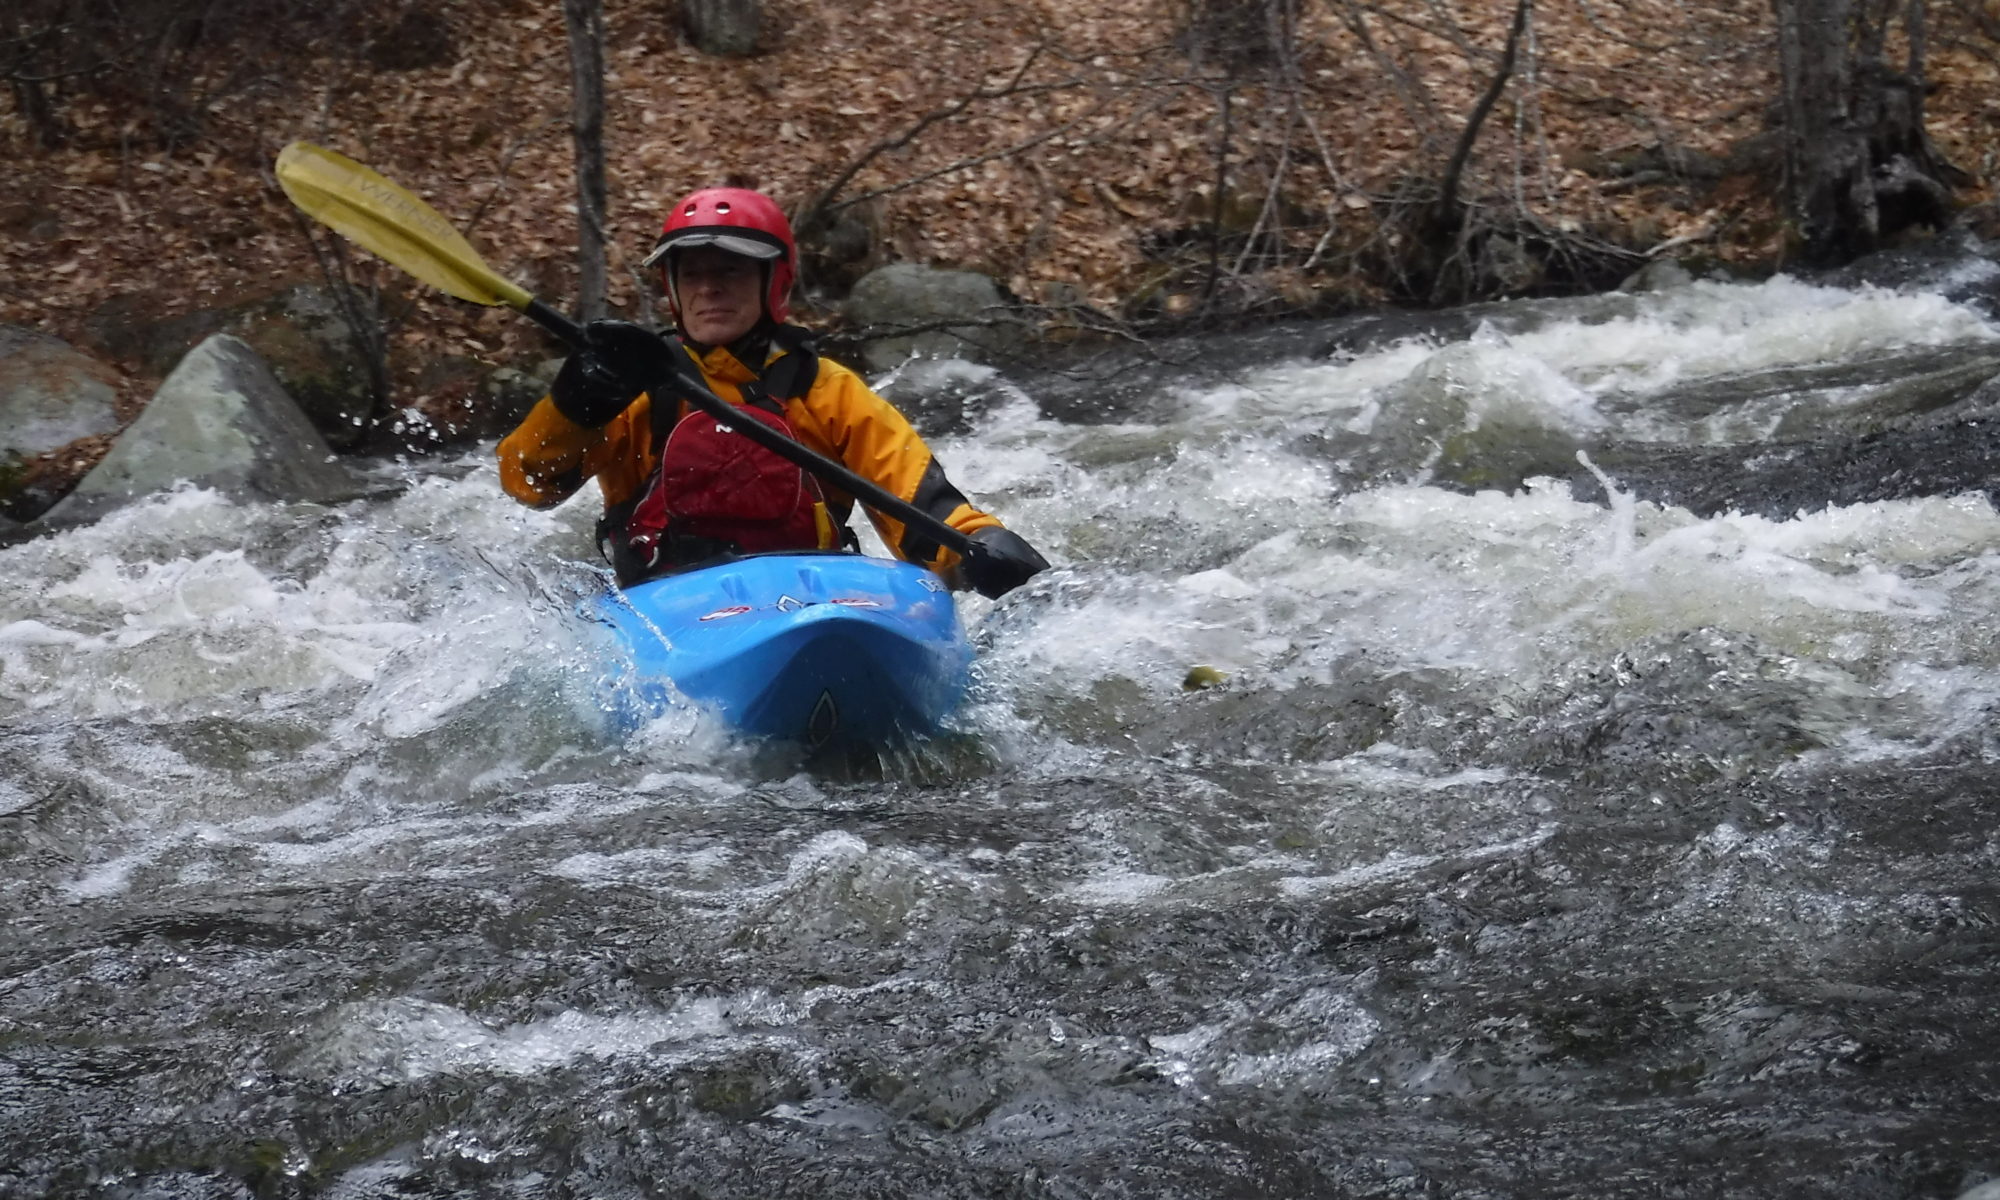 Apr 16, 2022: Webb River (+.25 ft) - Penobscot Paddle and Chowder Society